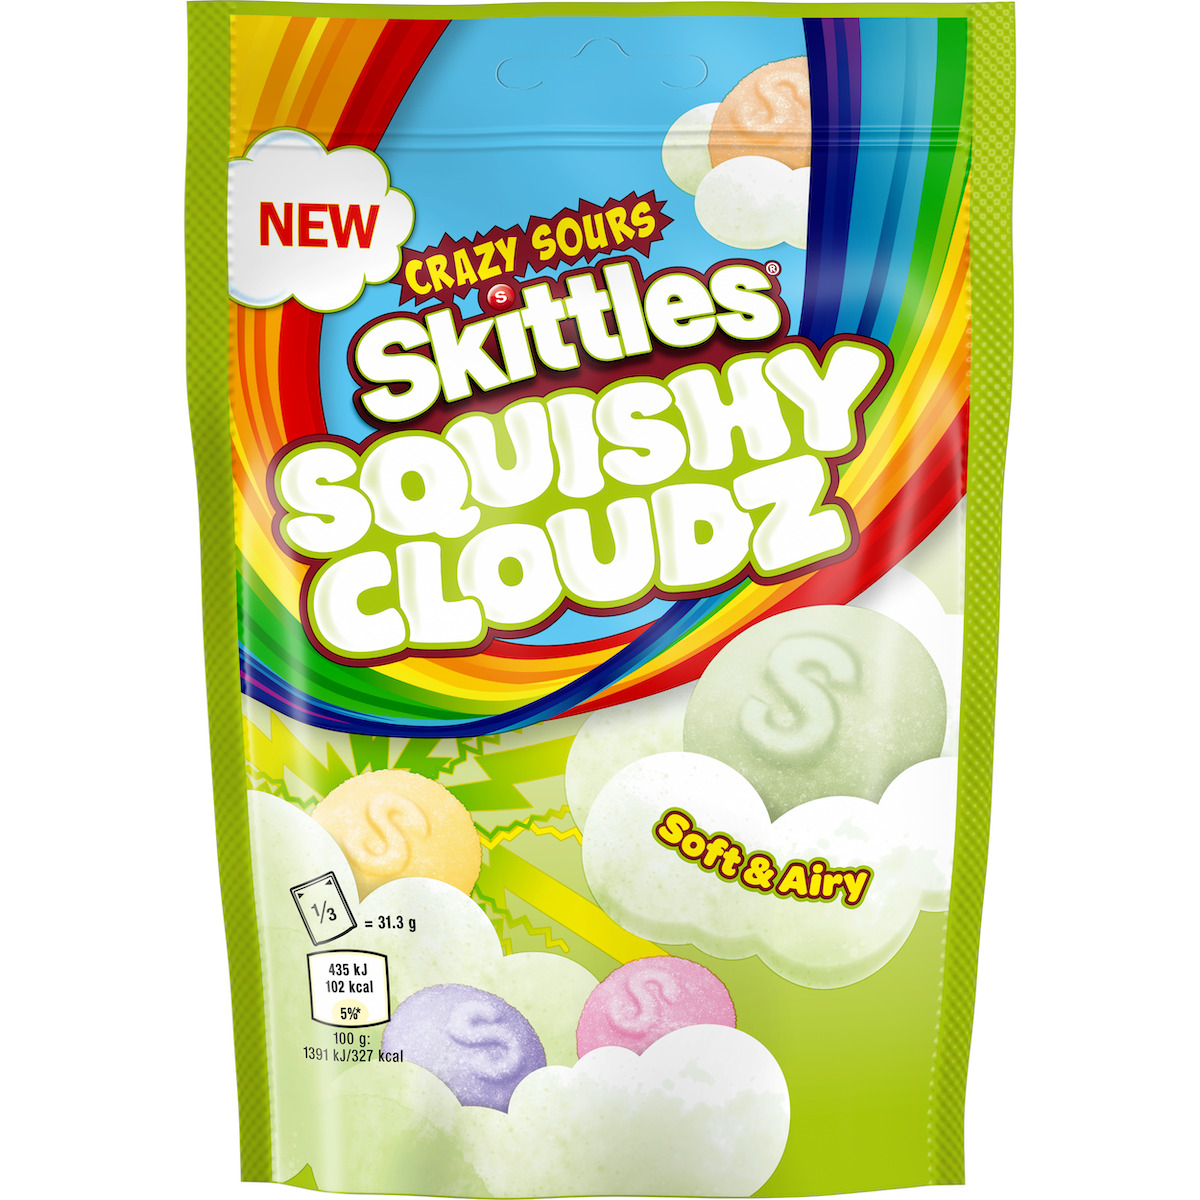 Mars Wrigley enters ‘gummy’ category with Skittles Squishy Cloudz